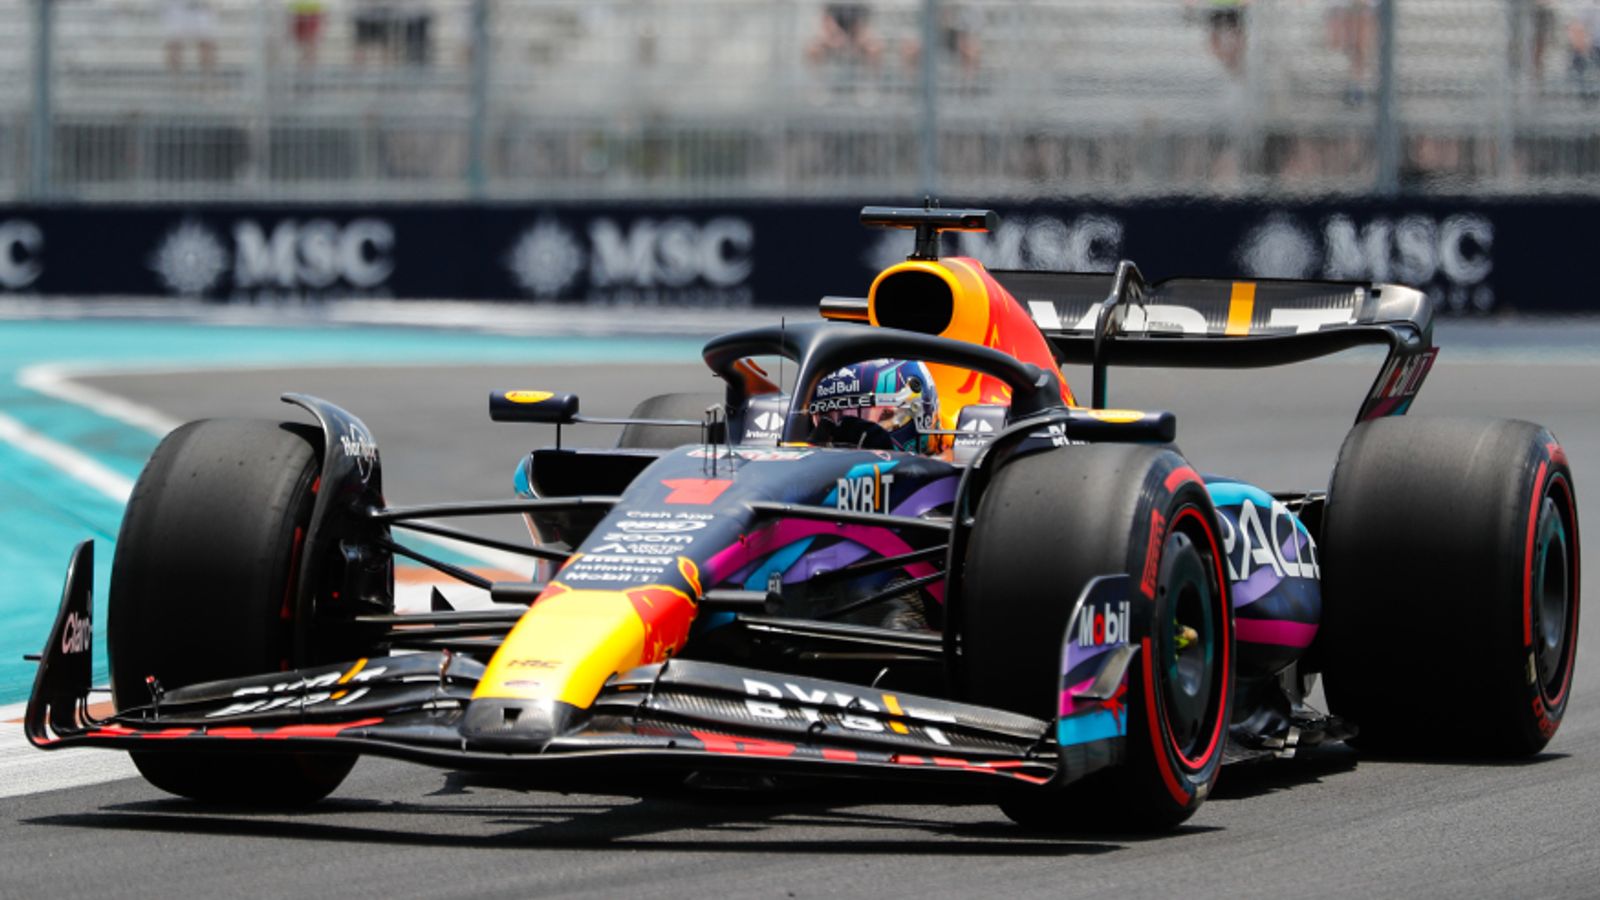 Miami GP Max Verstappen tops final practice as Red Bull continue to impress ahead of Qualifying F1 News